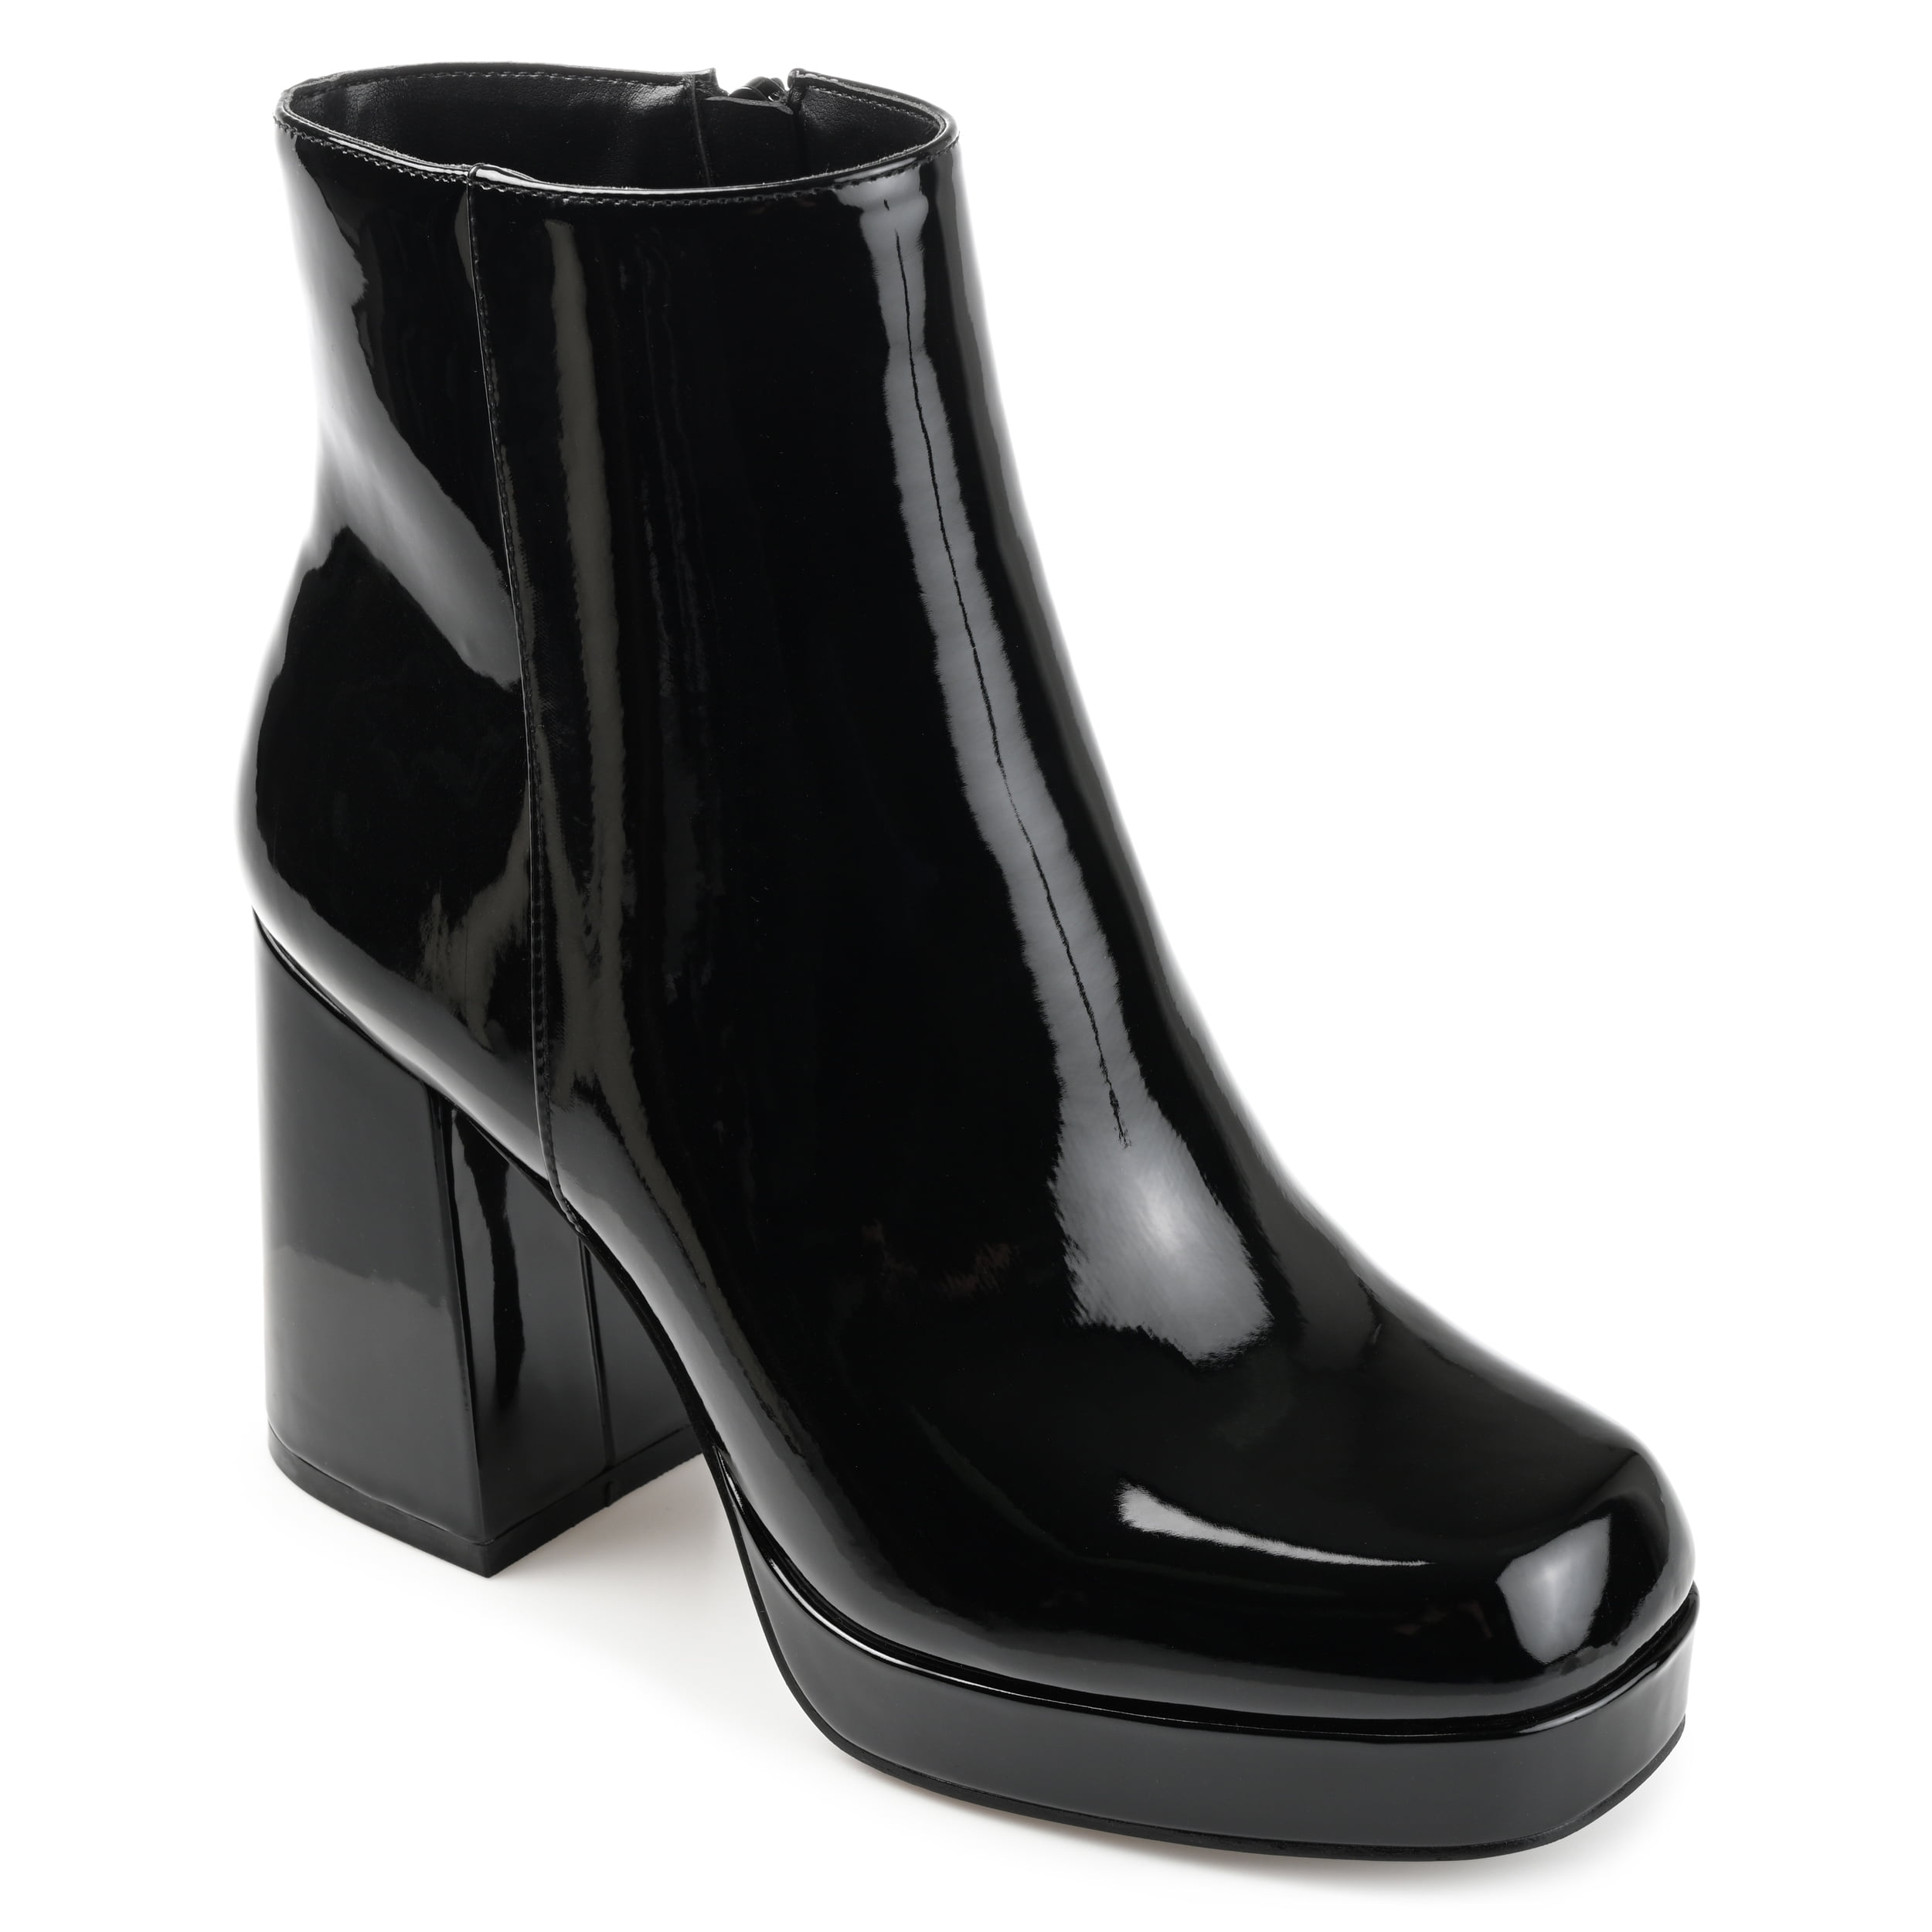 Buy FOREVER 21 Women Black Heeled Boots - Boots for Women 1185519 | Myntra